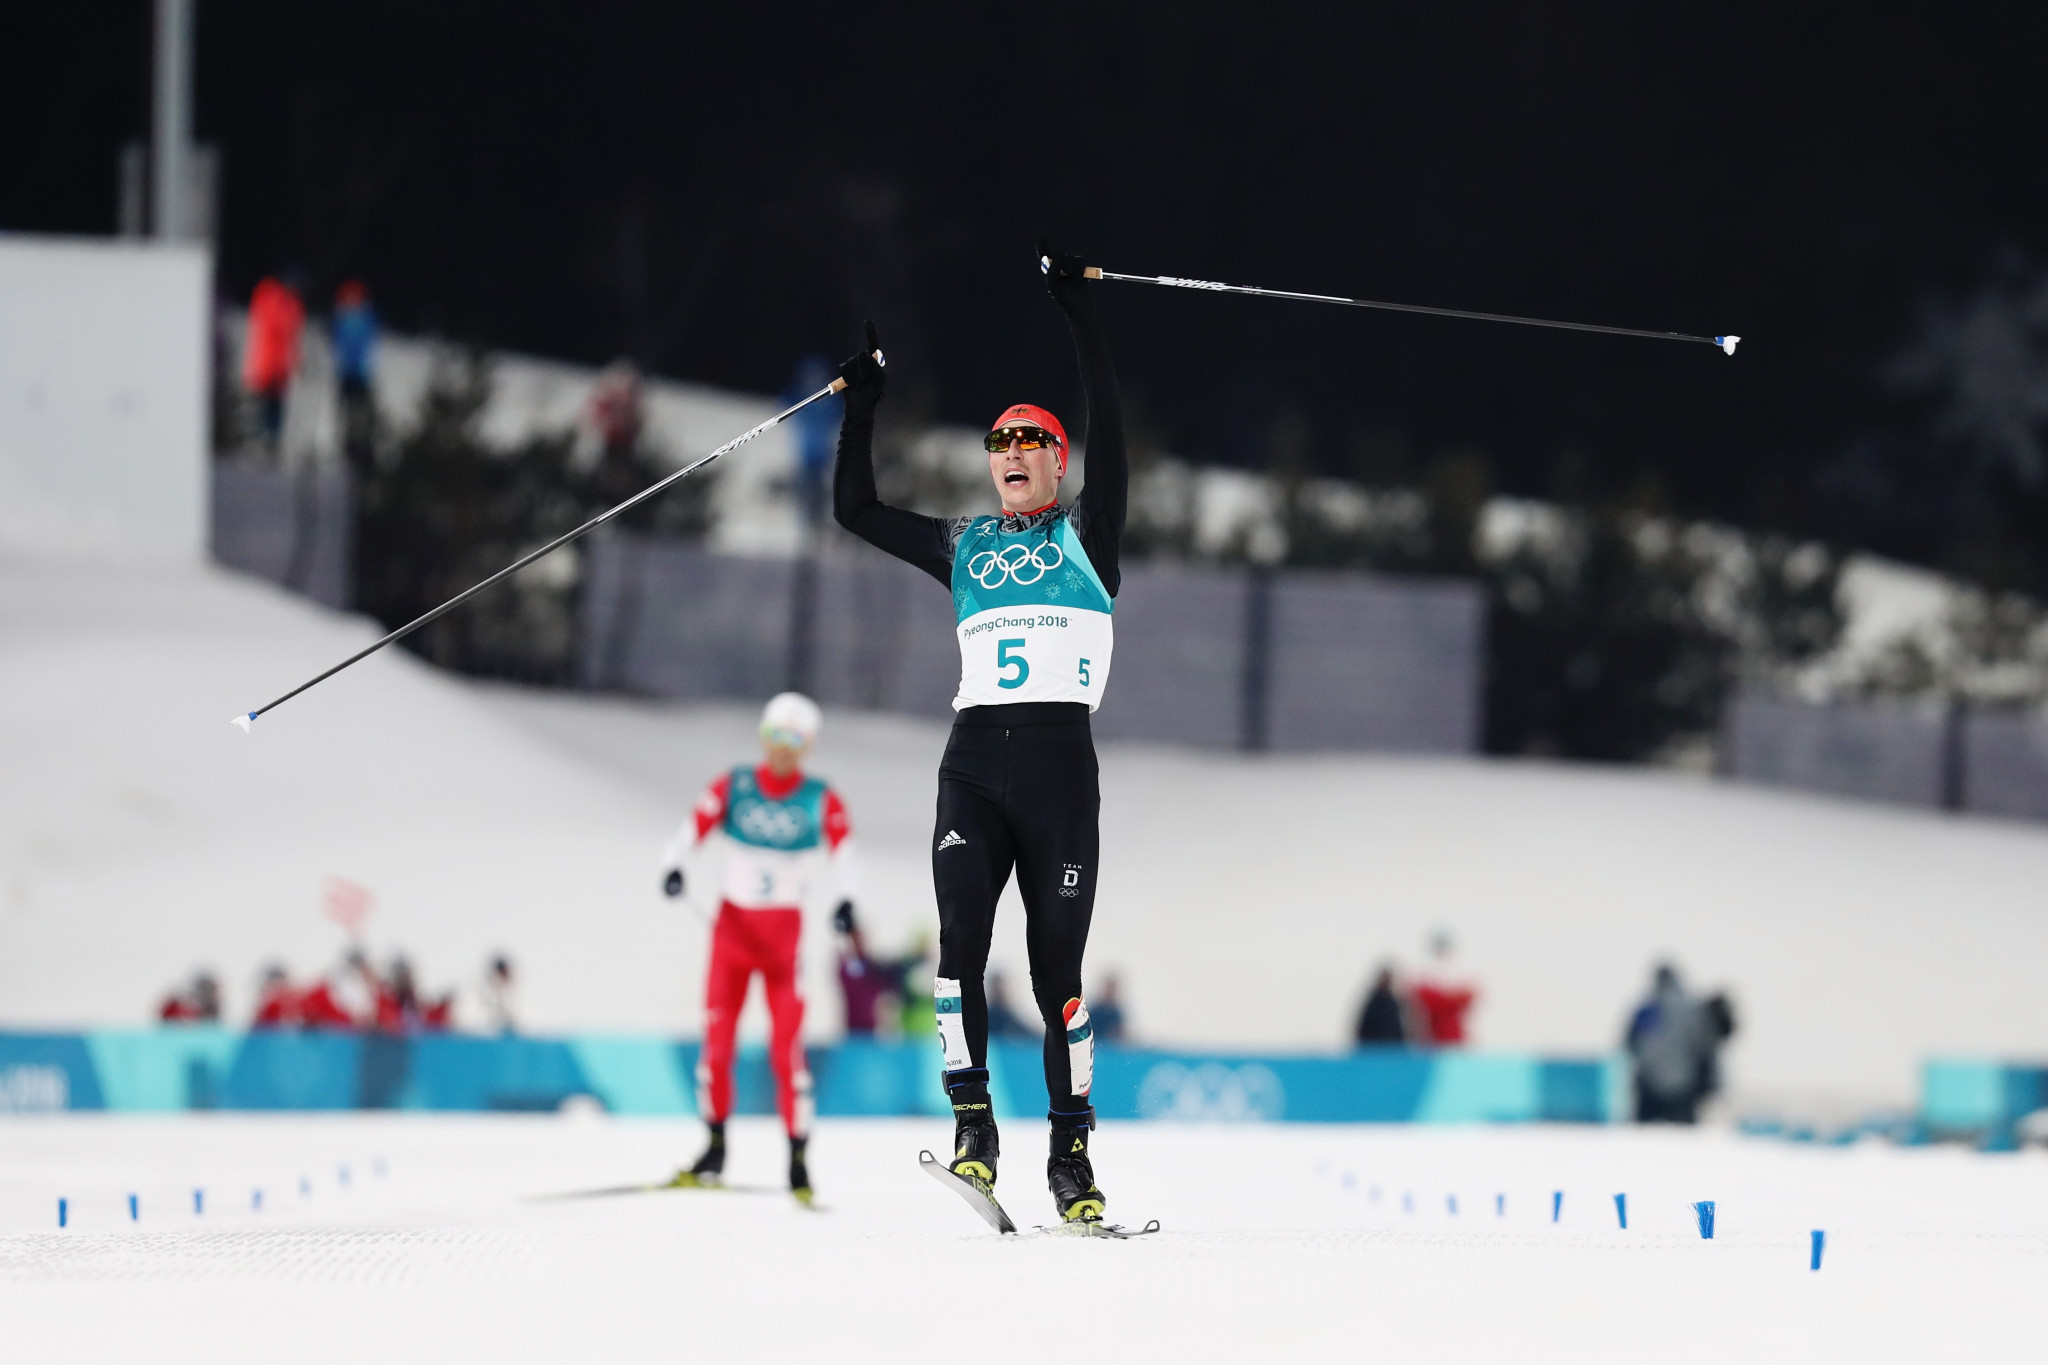 Reigning Nordic combined Olympic champion Frenzel tests positive for COVID-19 at Beijing 2022